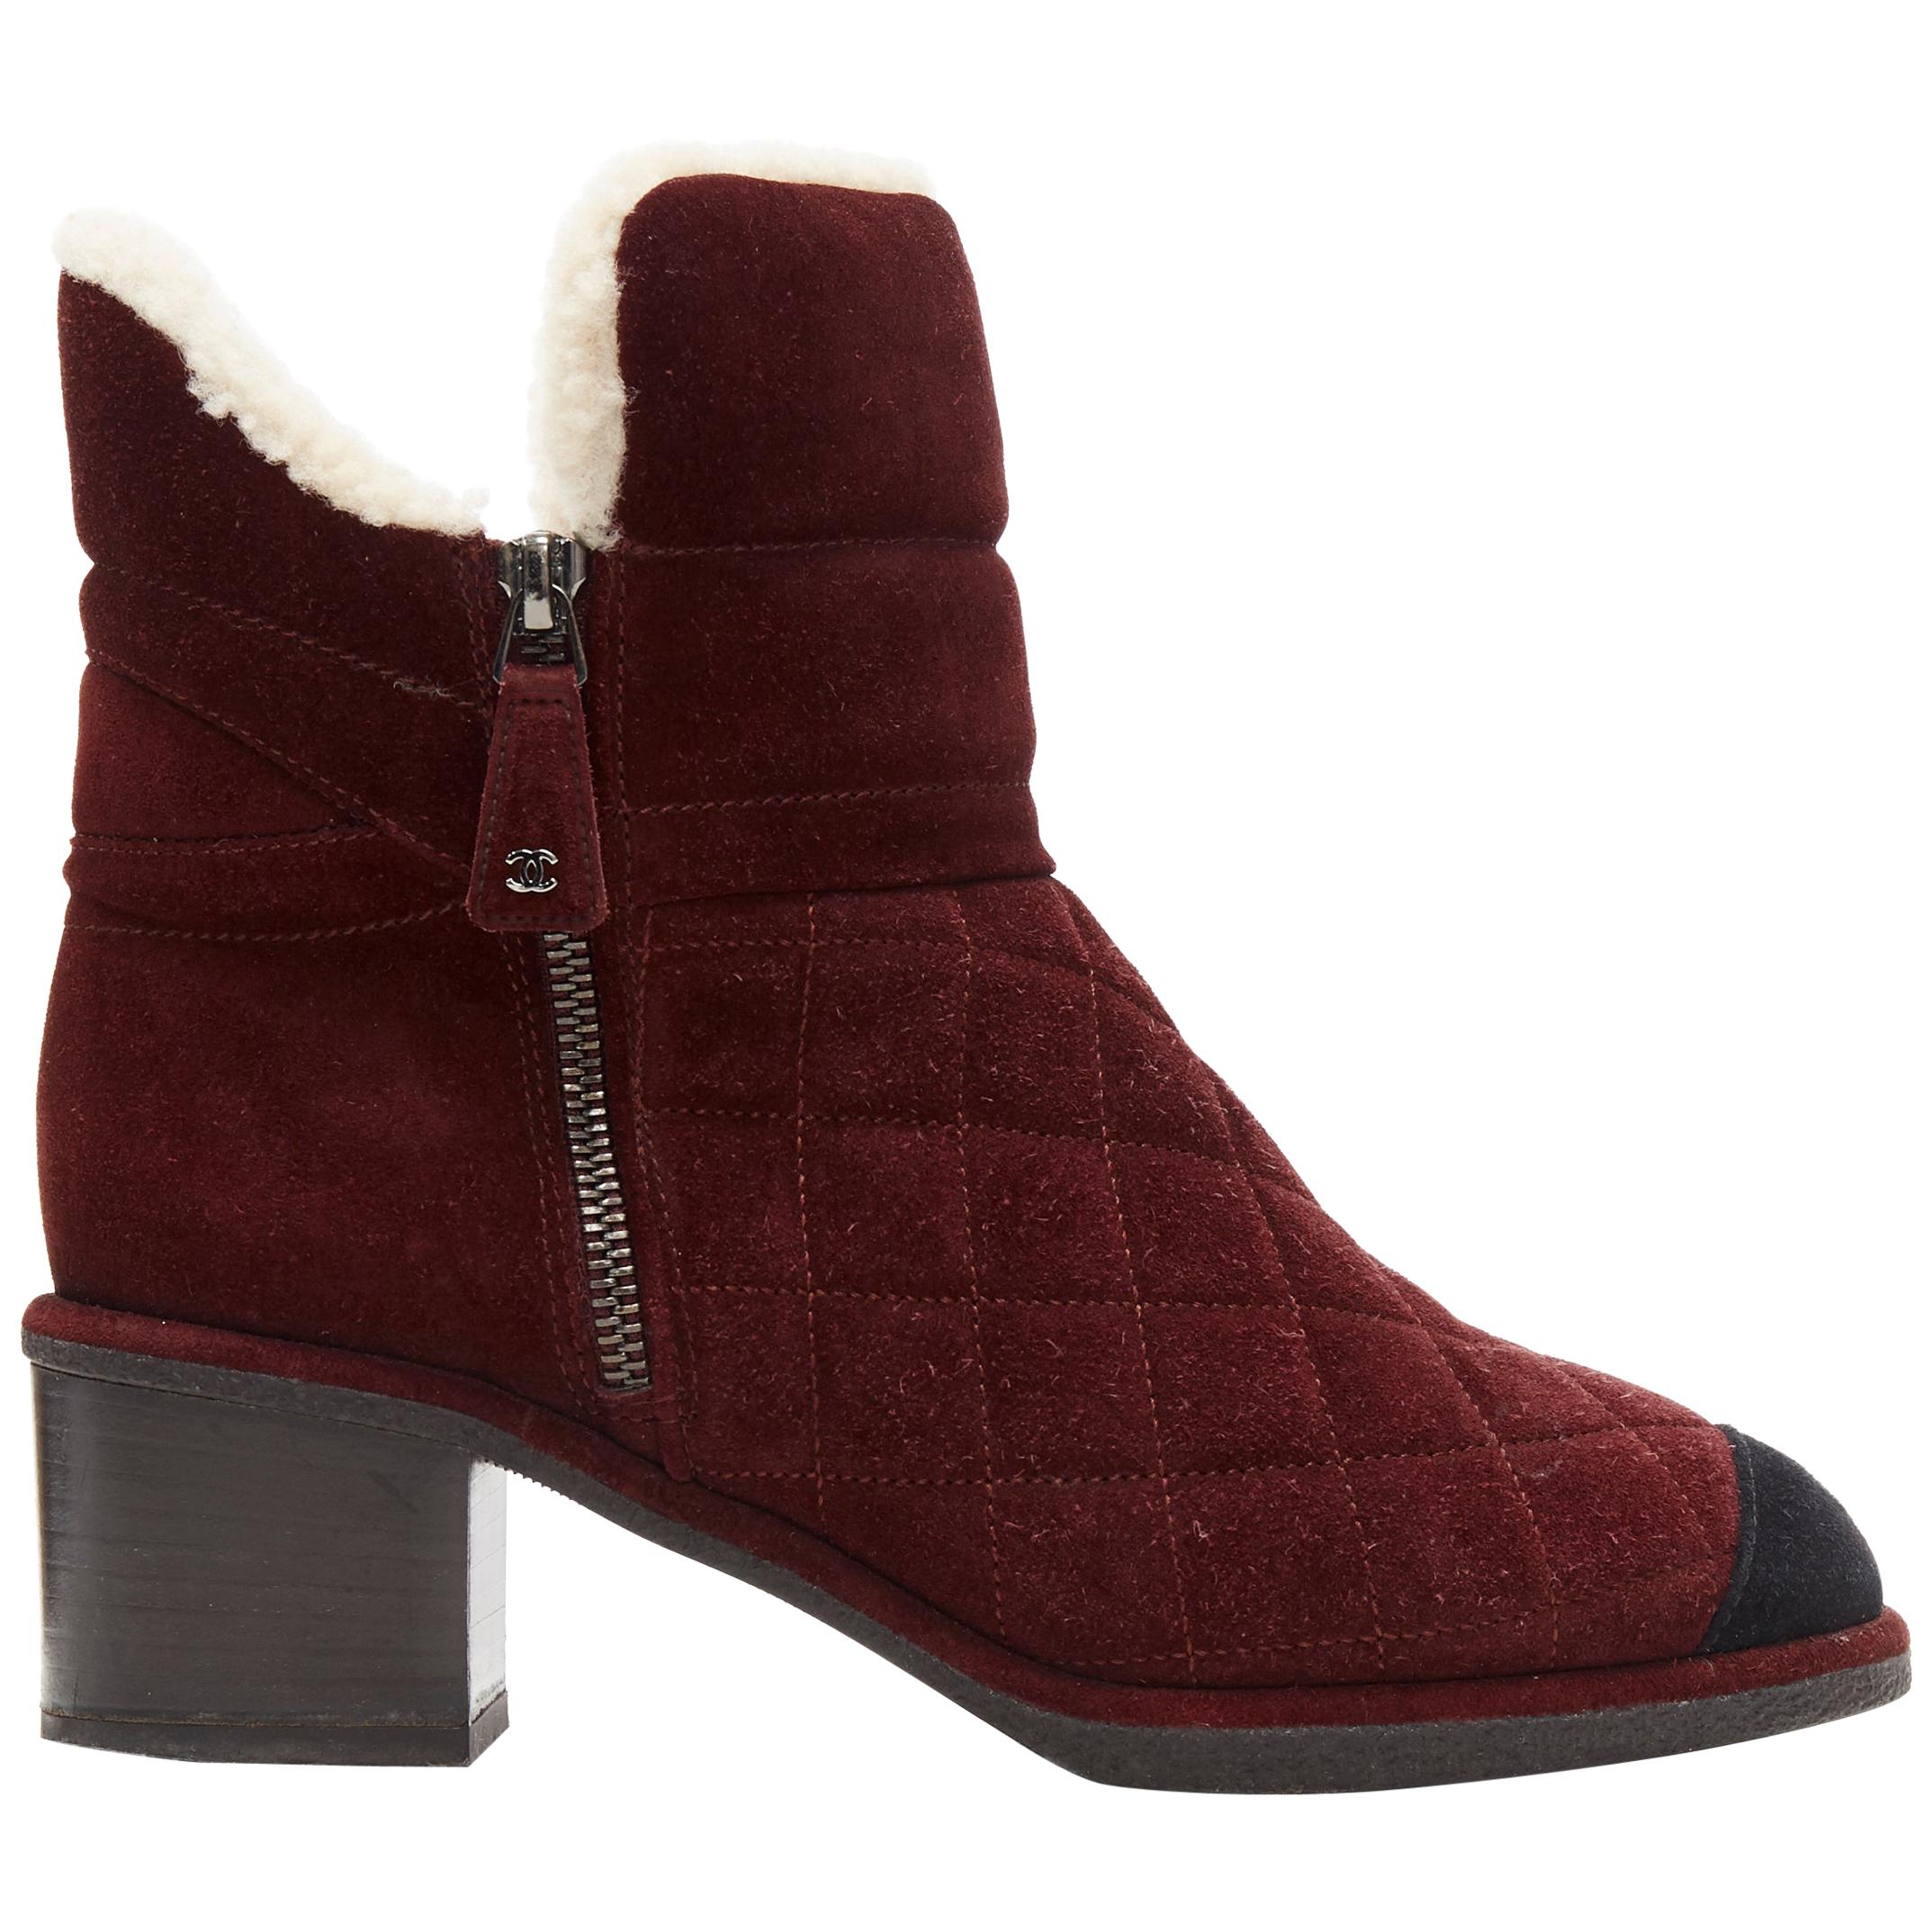 CHANEL burgundy CC red diamond quilted suede toe cap